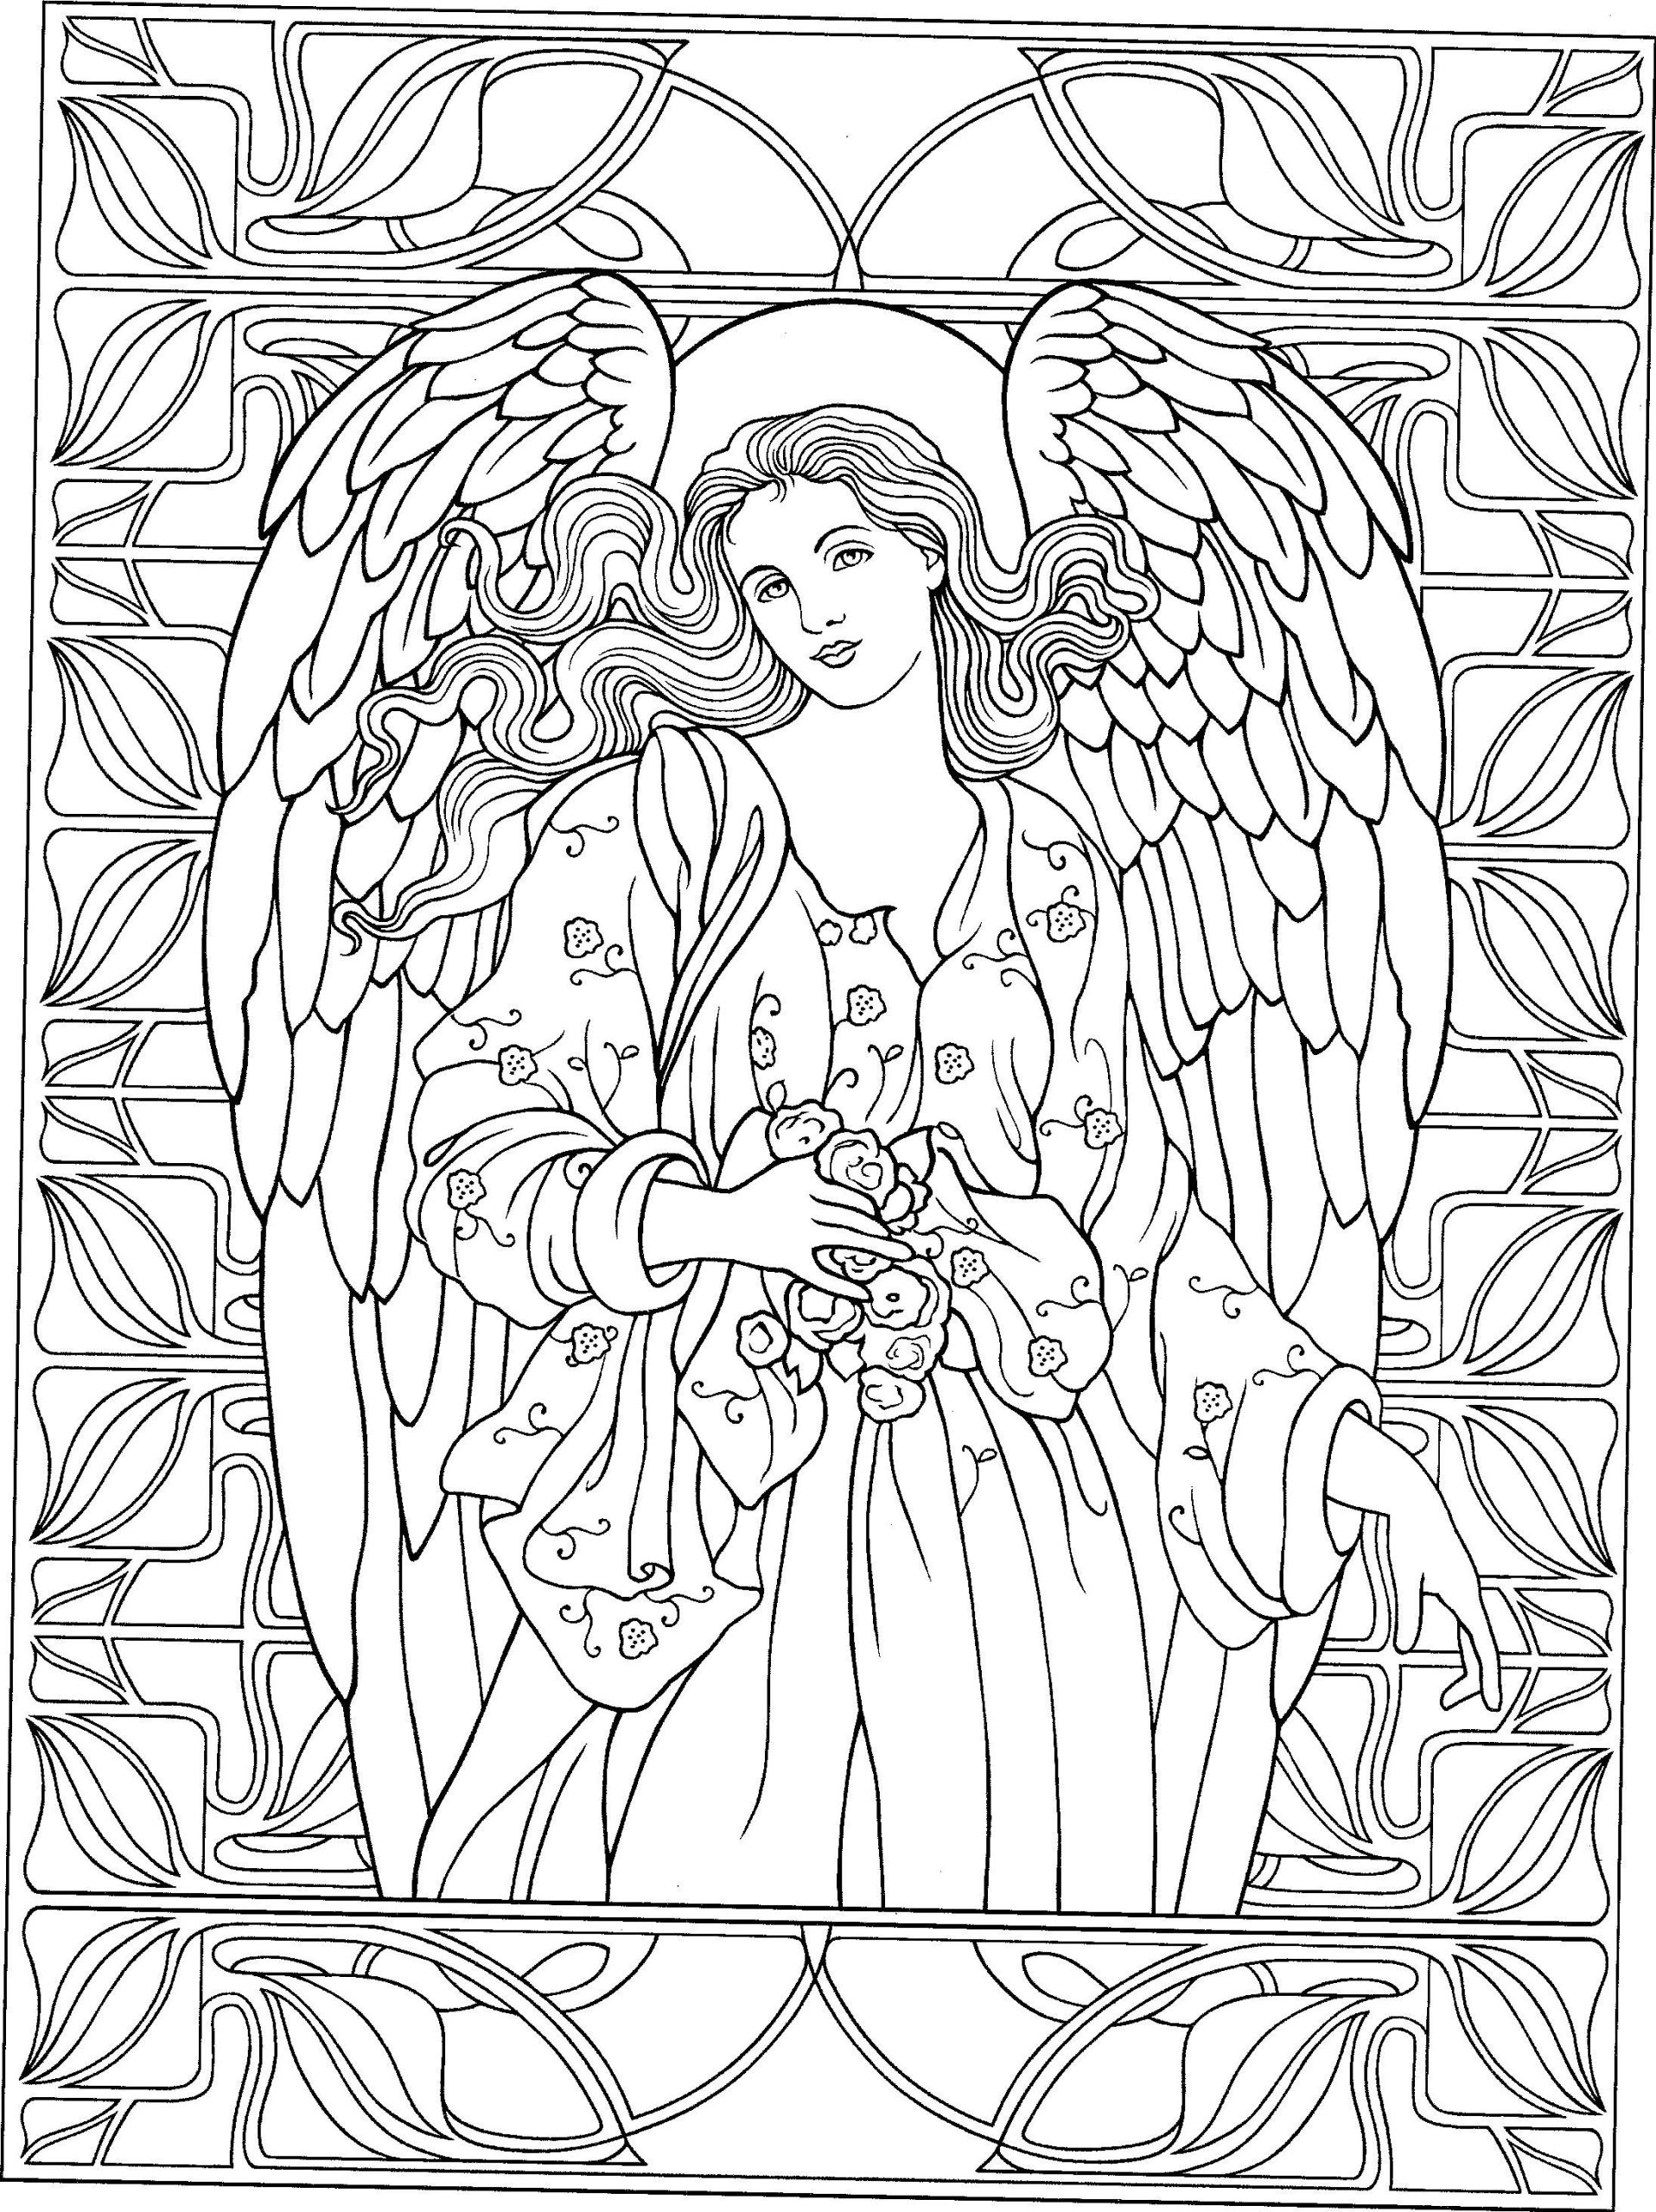 Remarkable Angel Coloring Pages For Adults Picture Inspirations Printable  Jpg – Slavyanka